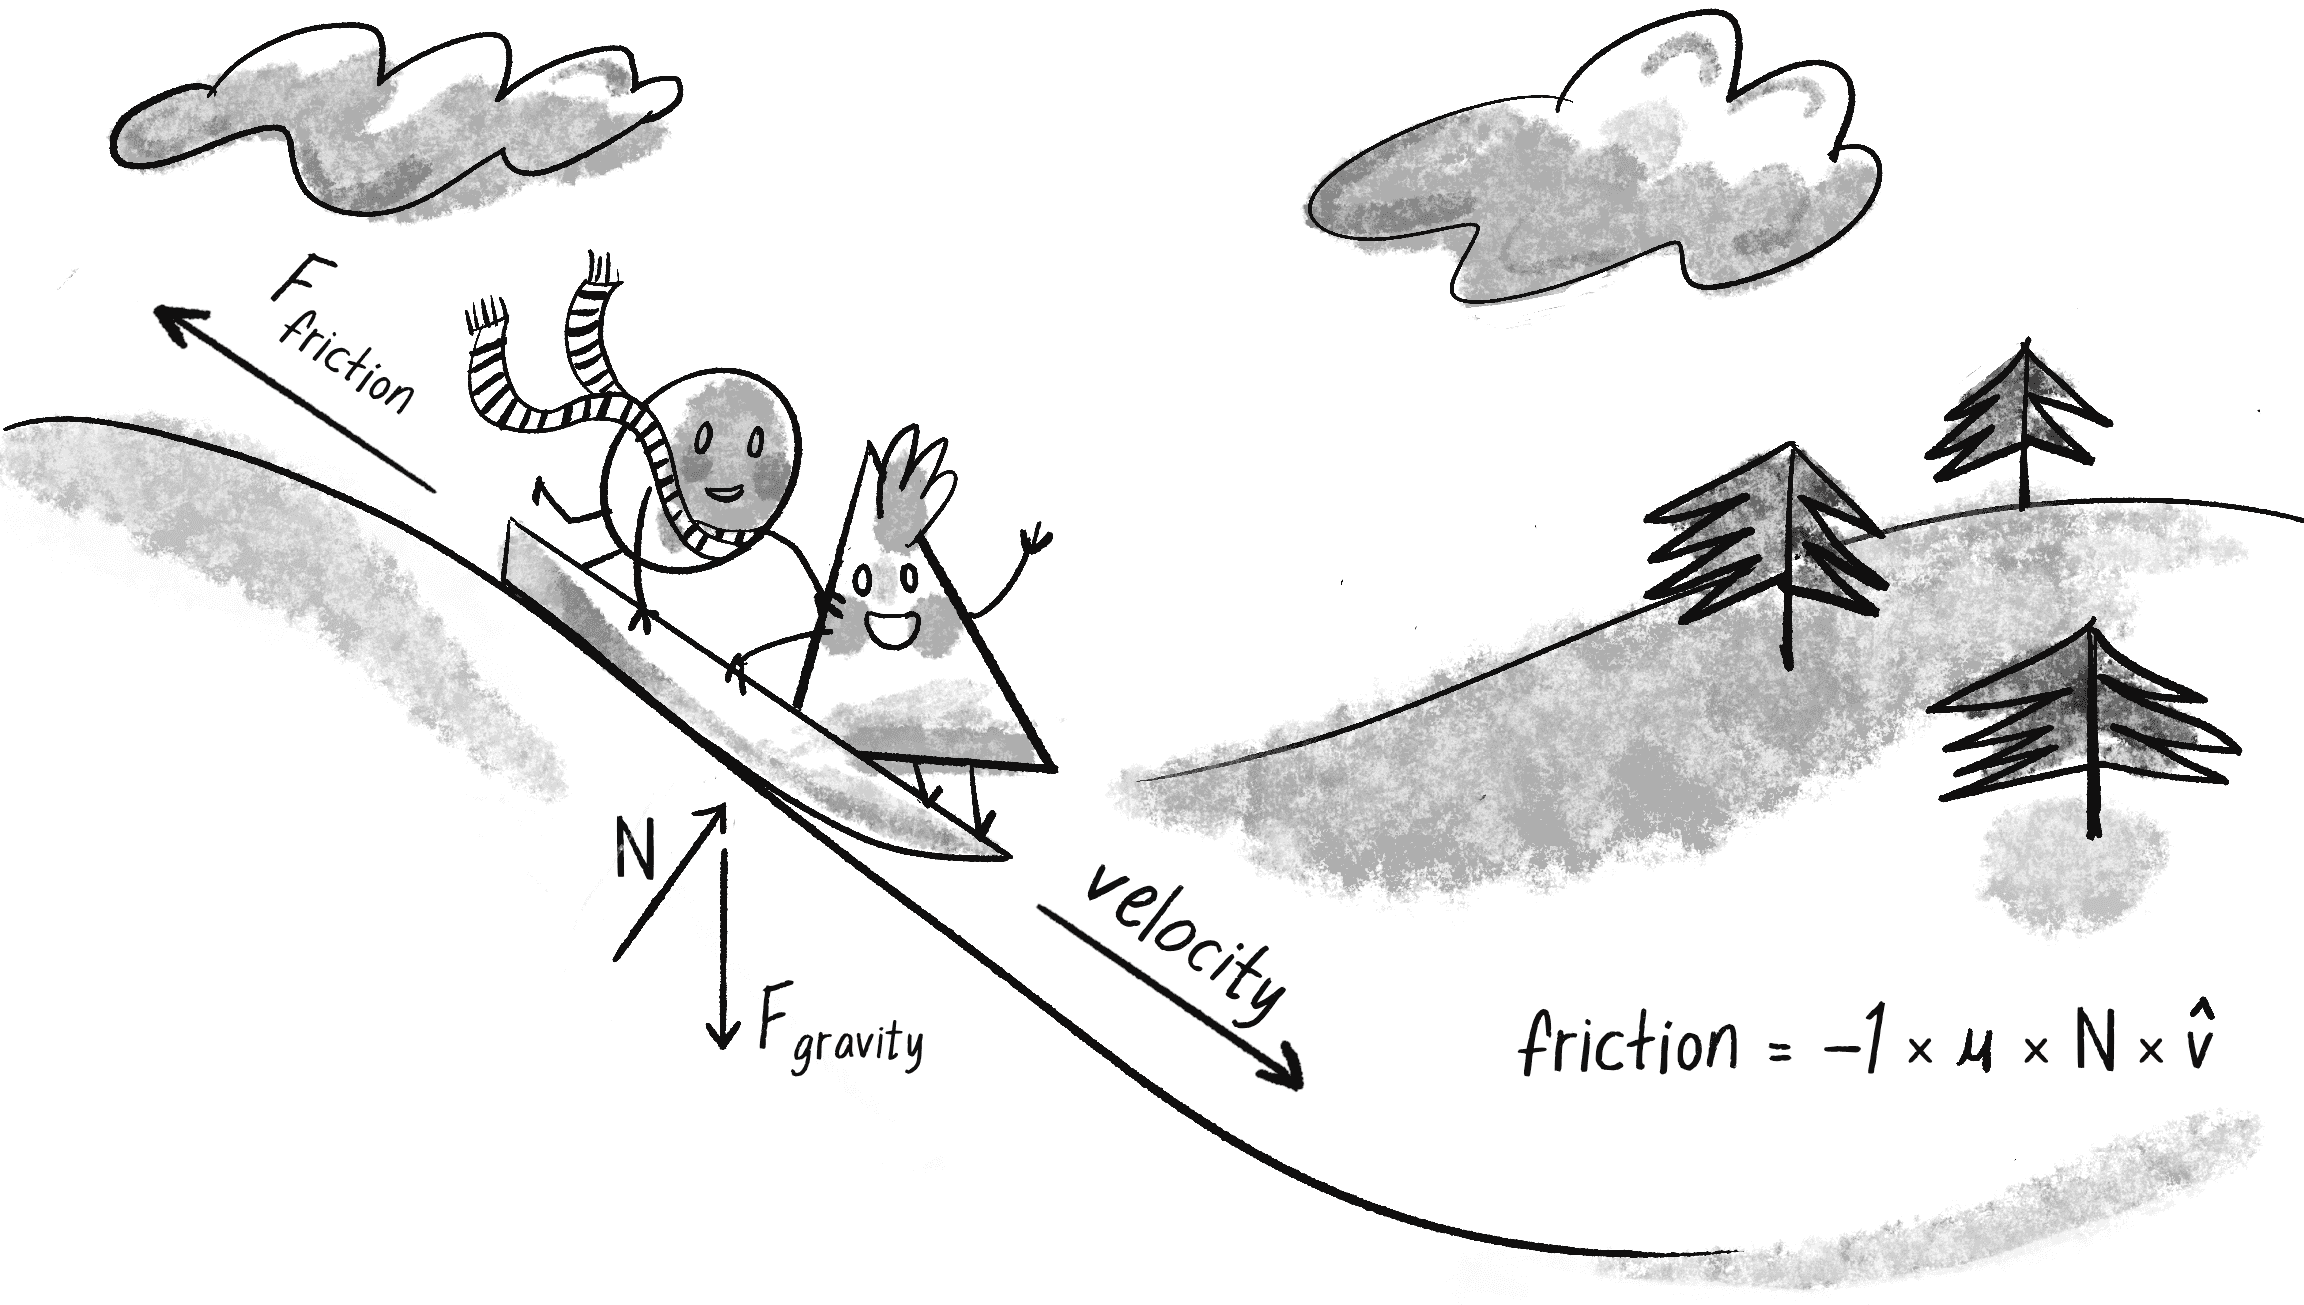 Figure 2.3: Friction is a force that points in the opposite direction of the sled’s velocity when the sled is sliding in contact with the hill.